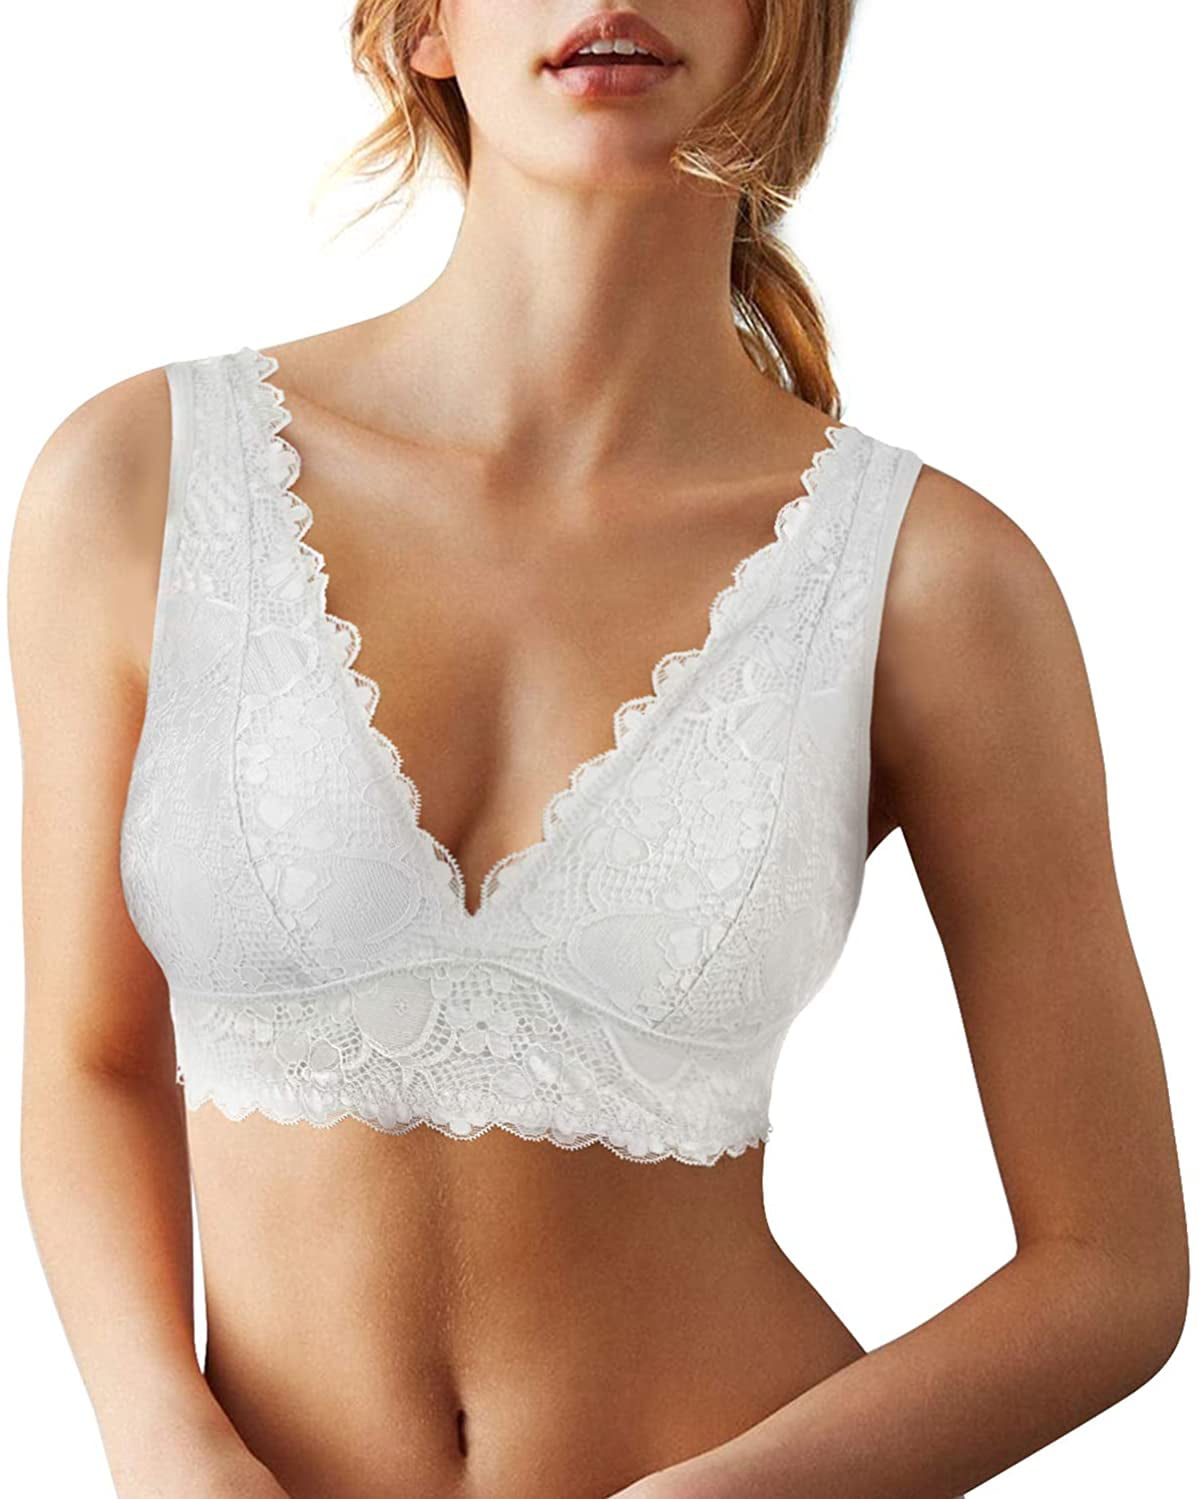 Bafully Comfort Lace Bralette for Women Deep V Soft Sleep Bra Crop Top Removable Padded Wirefree 